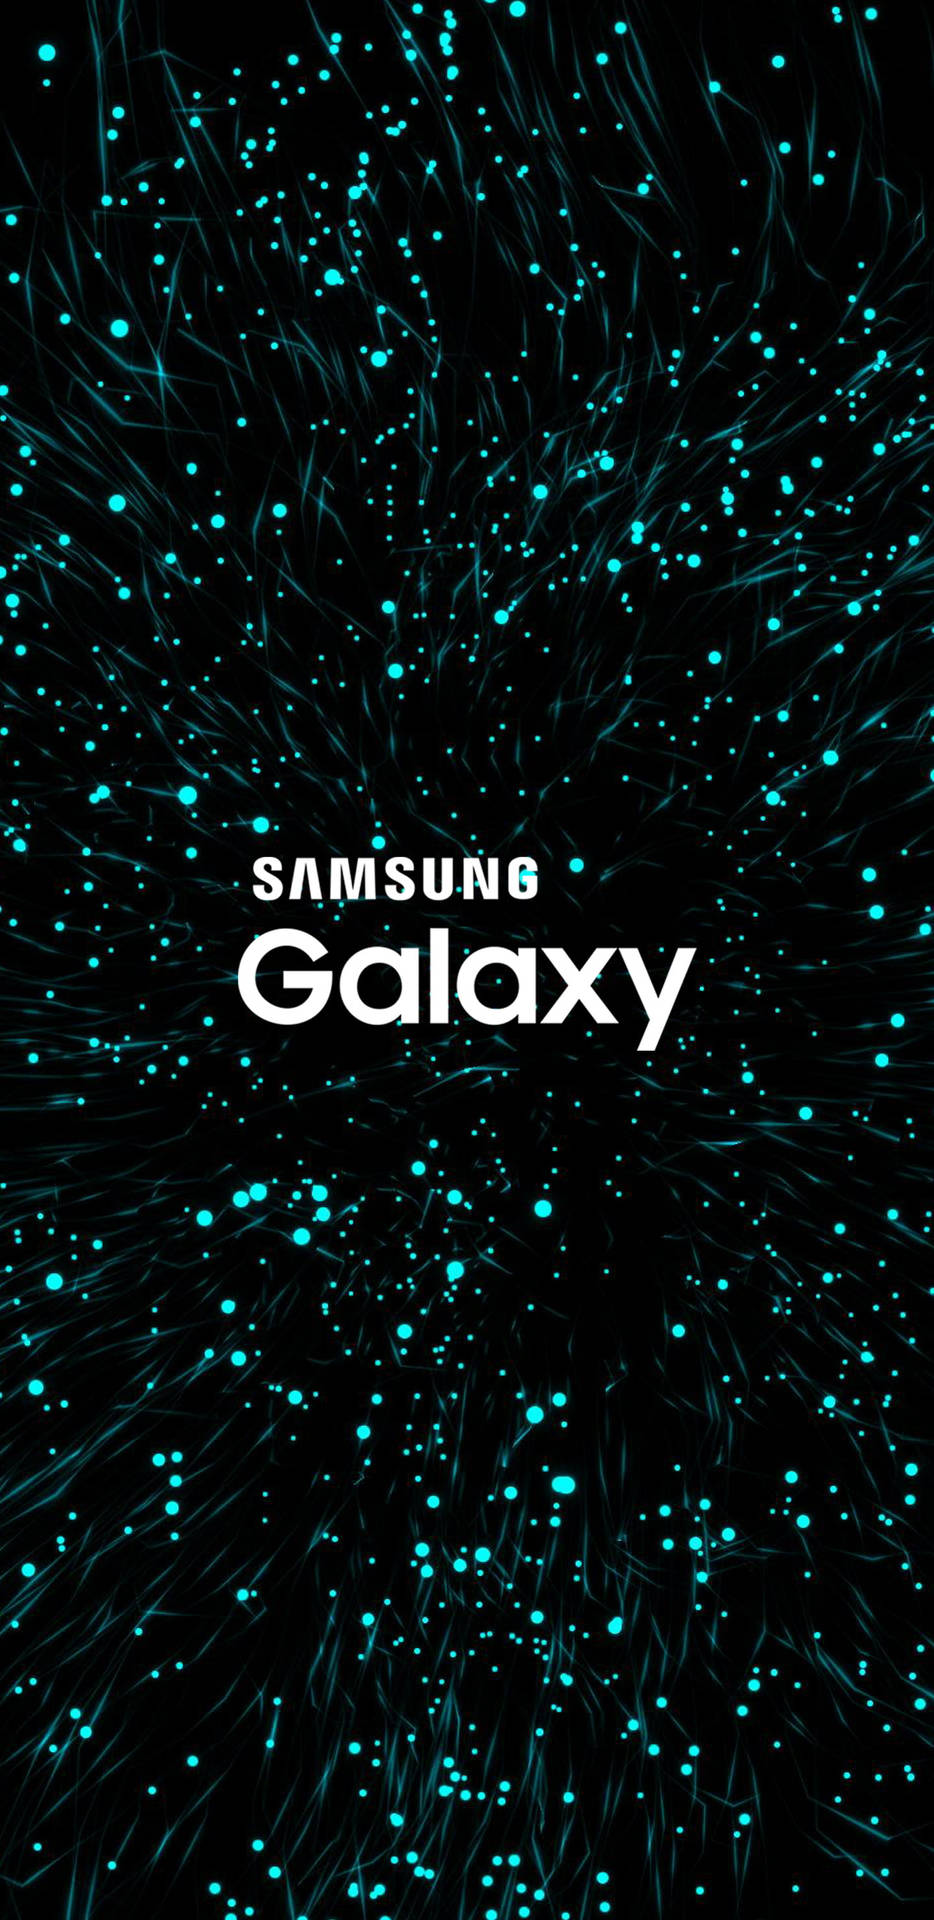 Samsung Galaxy Abstract Teal Lights Background